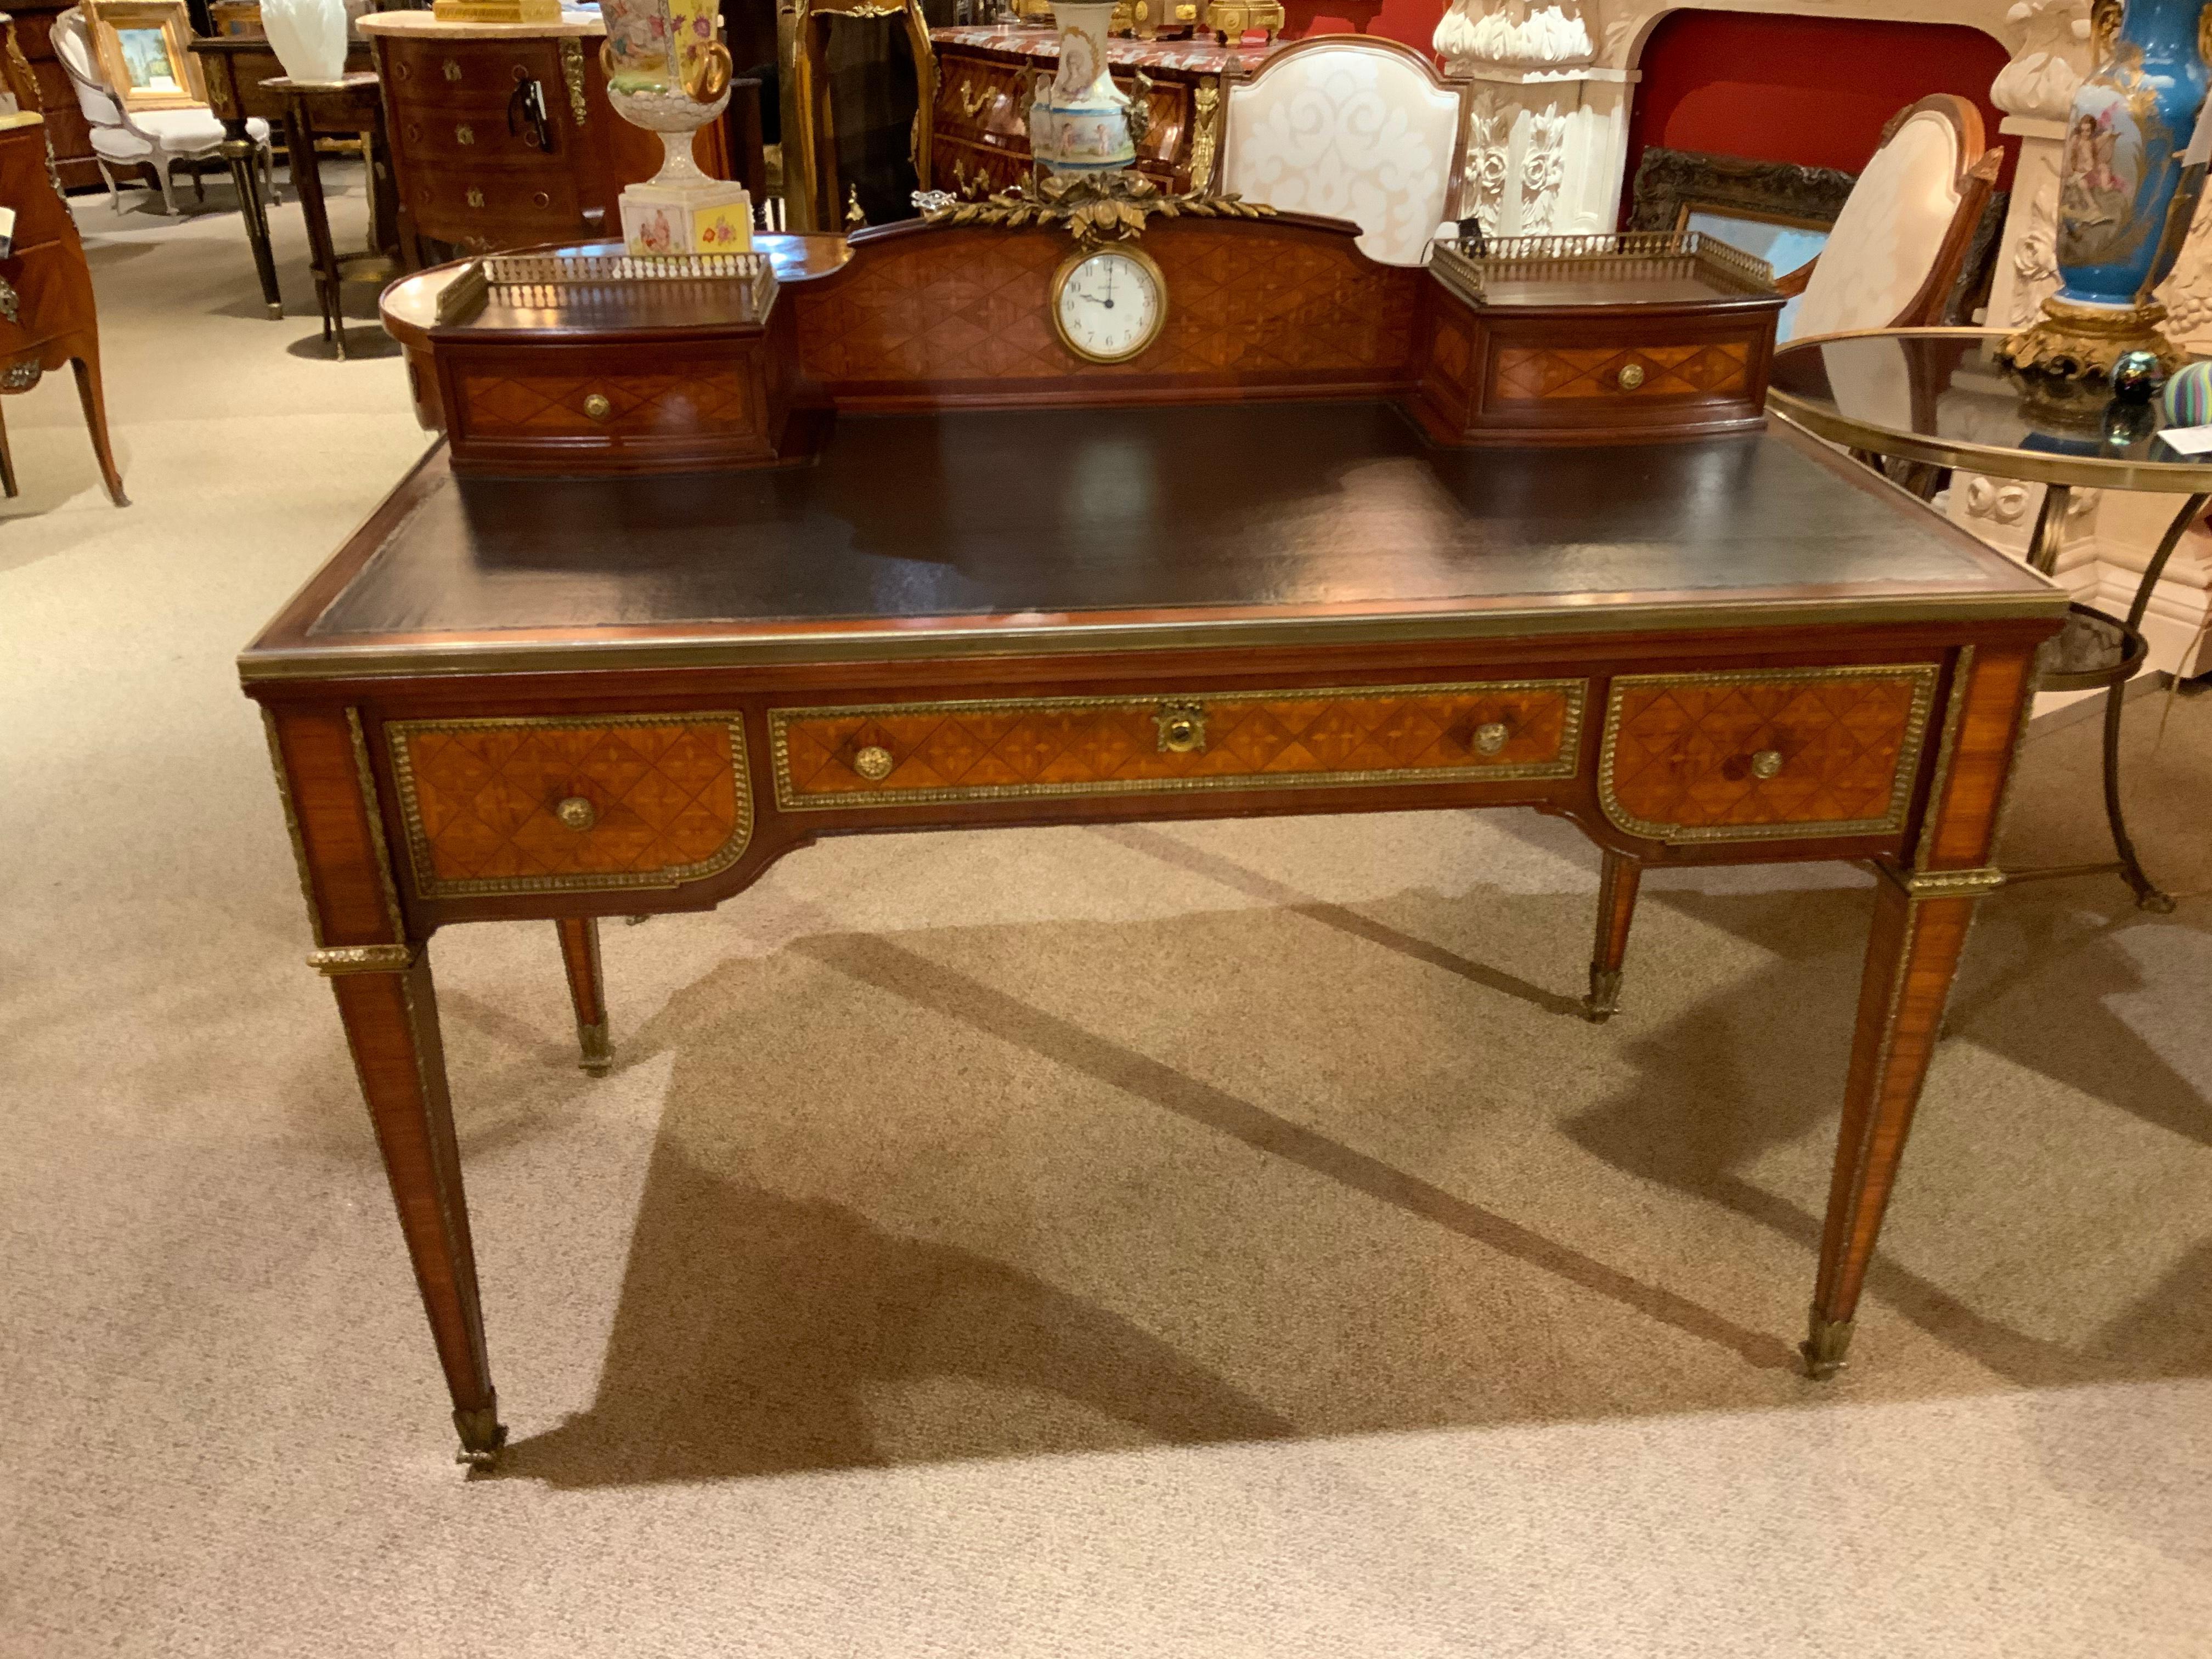 Walnut French Parquetry Inlaid Desk with Leather Top and Inset Clock